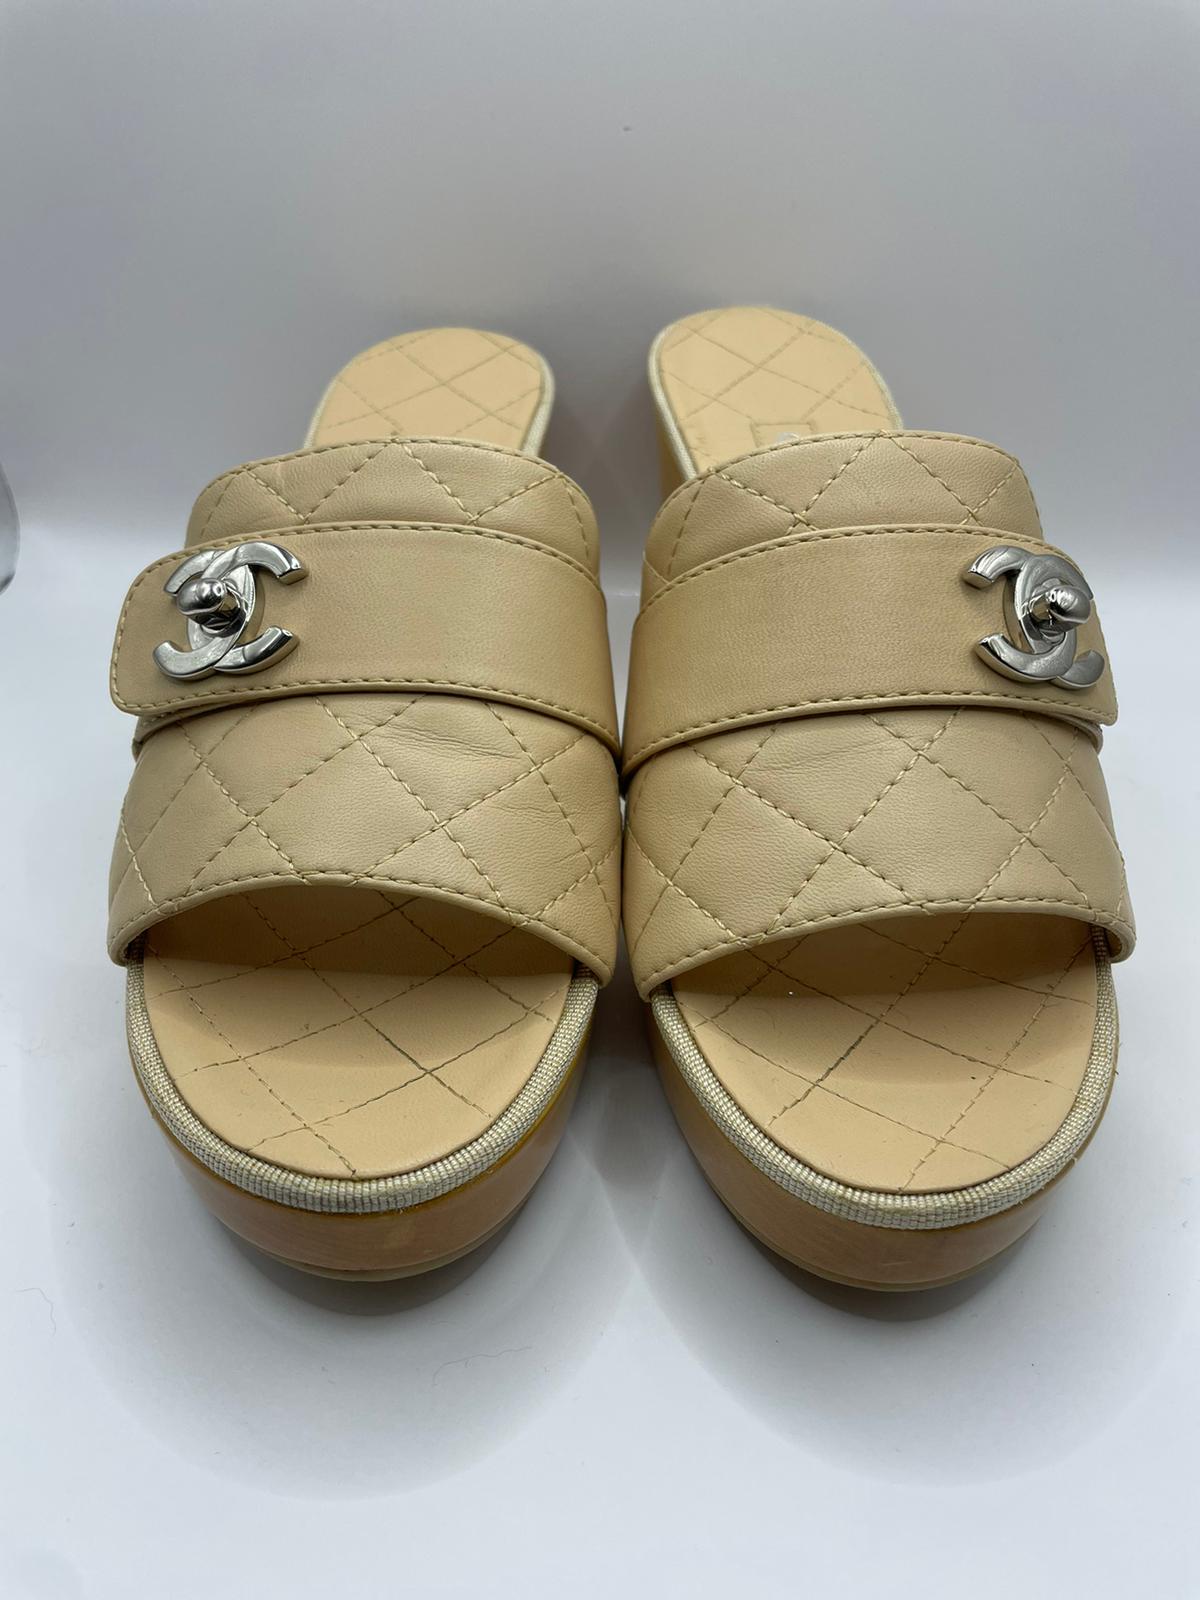 Chanel clogs size 39